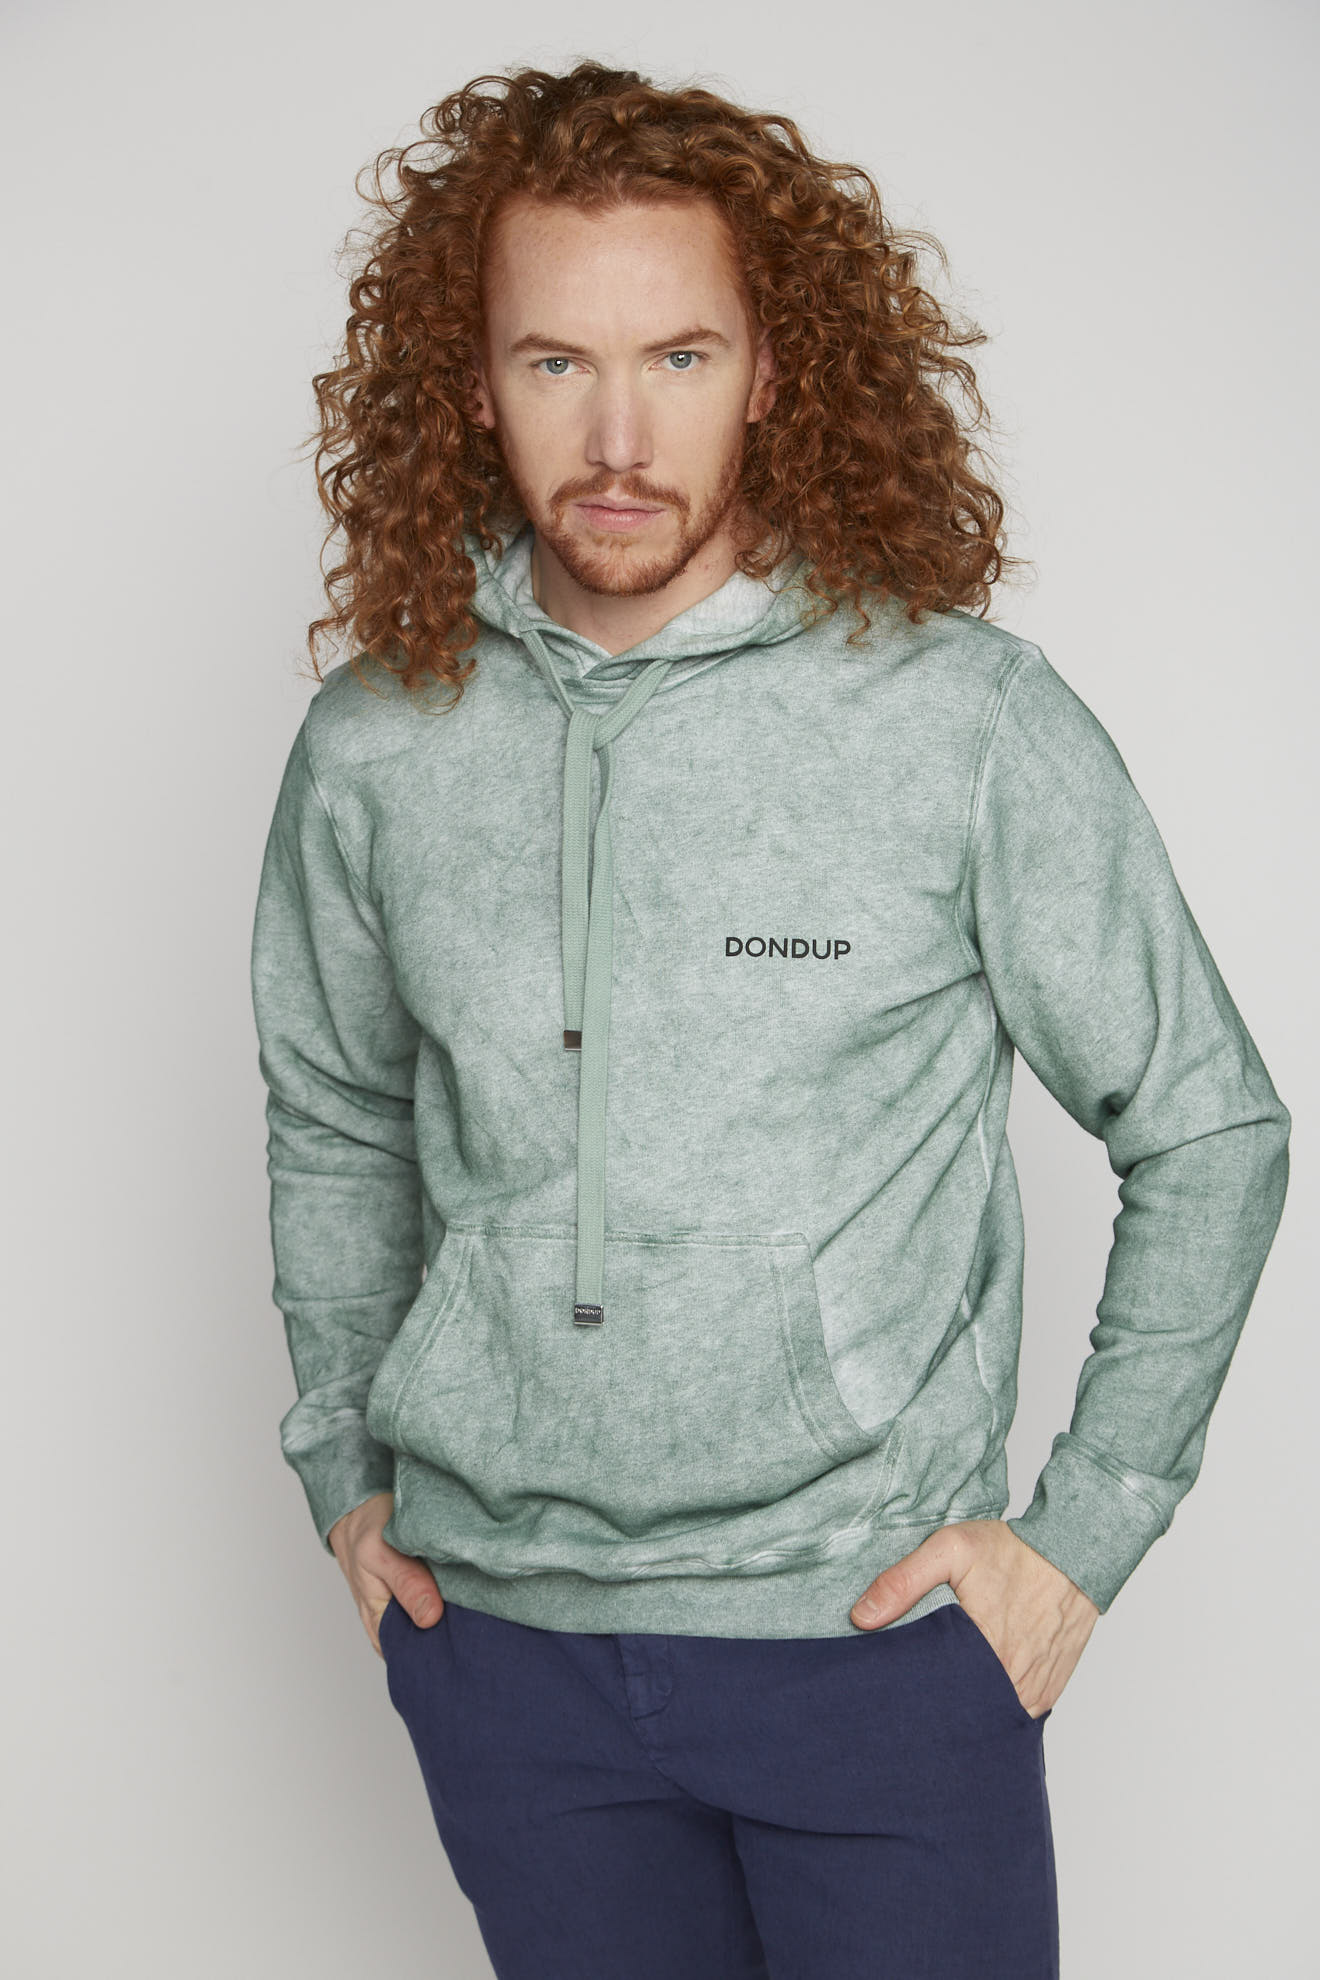 dondup hoodie green branded cotton model front